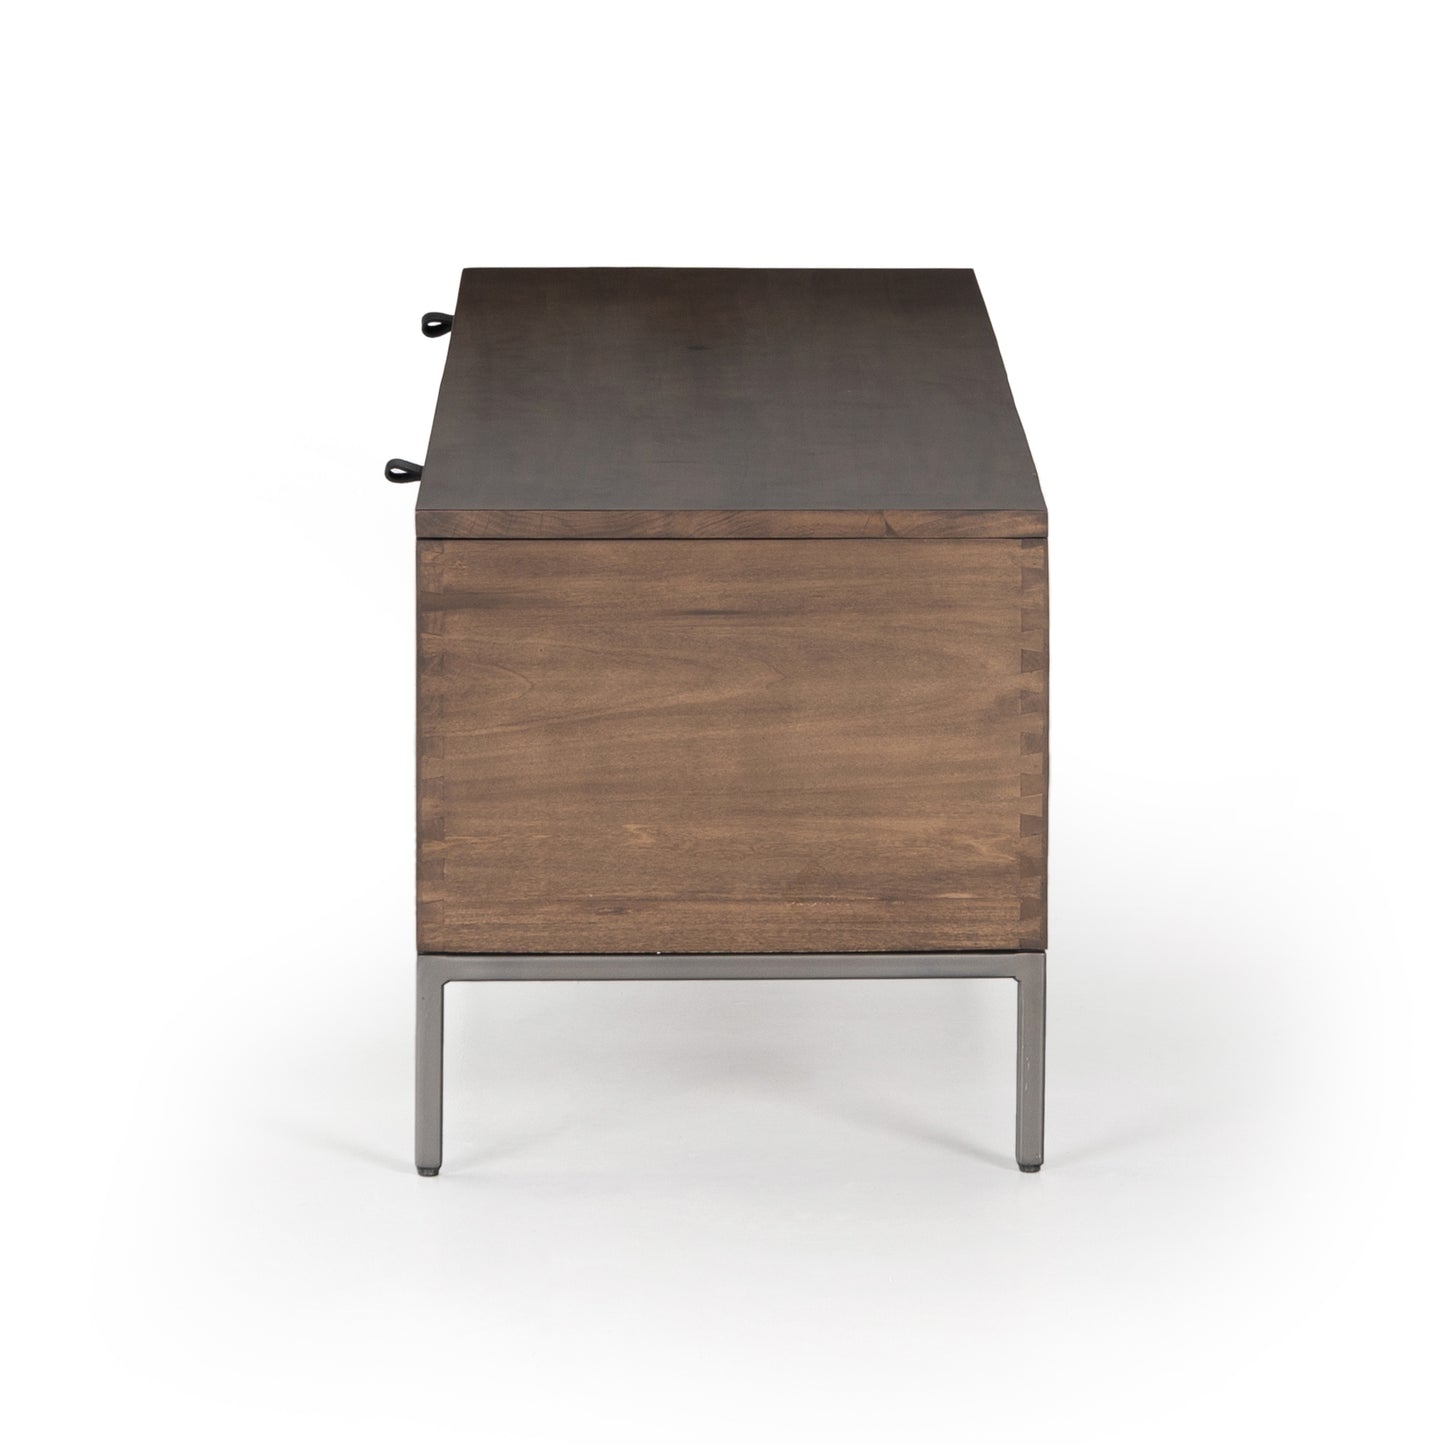 Load image into Gallery viewer, Trey Trunk Trunks Four Hands     Four Hands, Mid Century Modern Furniture, Old Bones Furniture Company, Old Bones Co, Modern Mid Century, Designer Furniture, https://www.oldbonesco.com/
